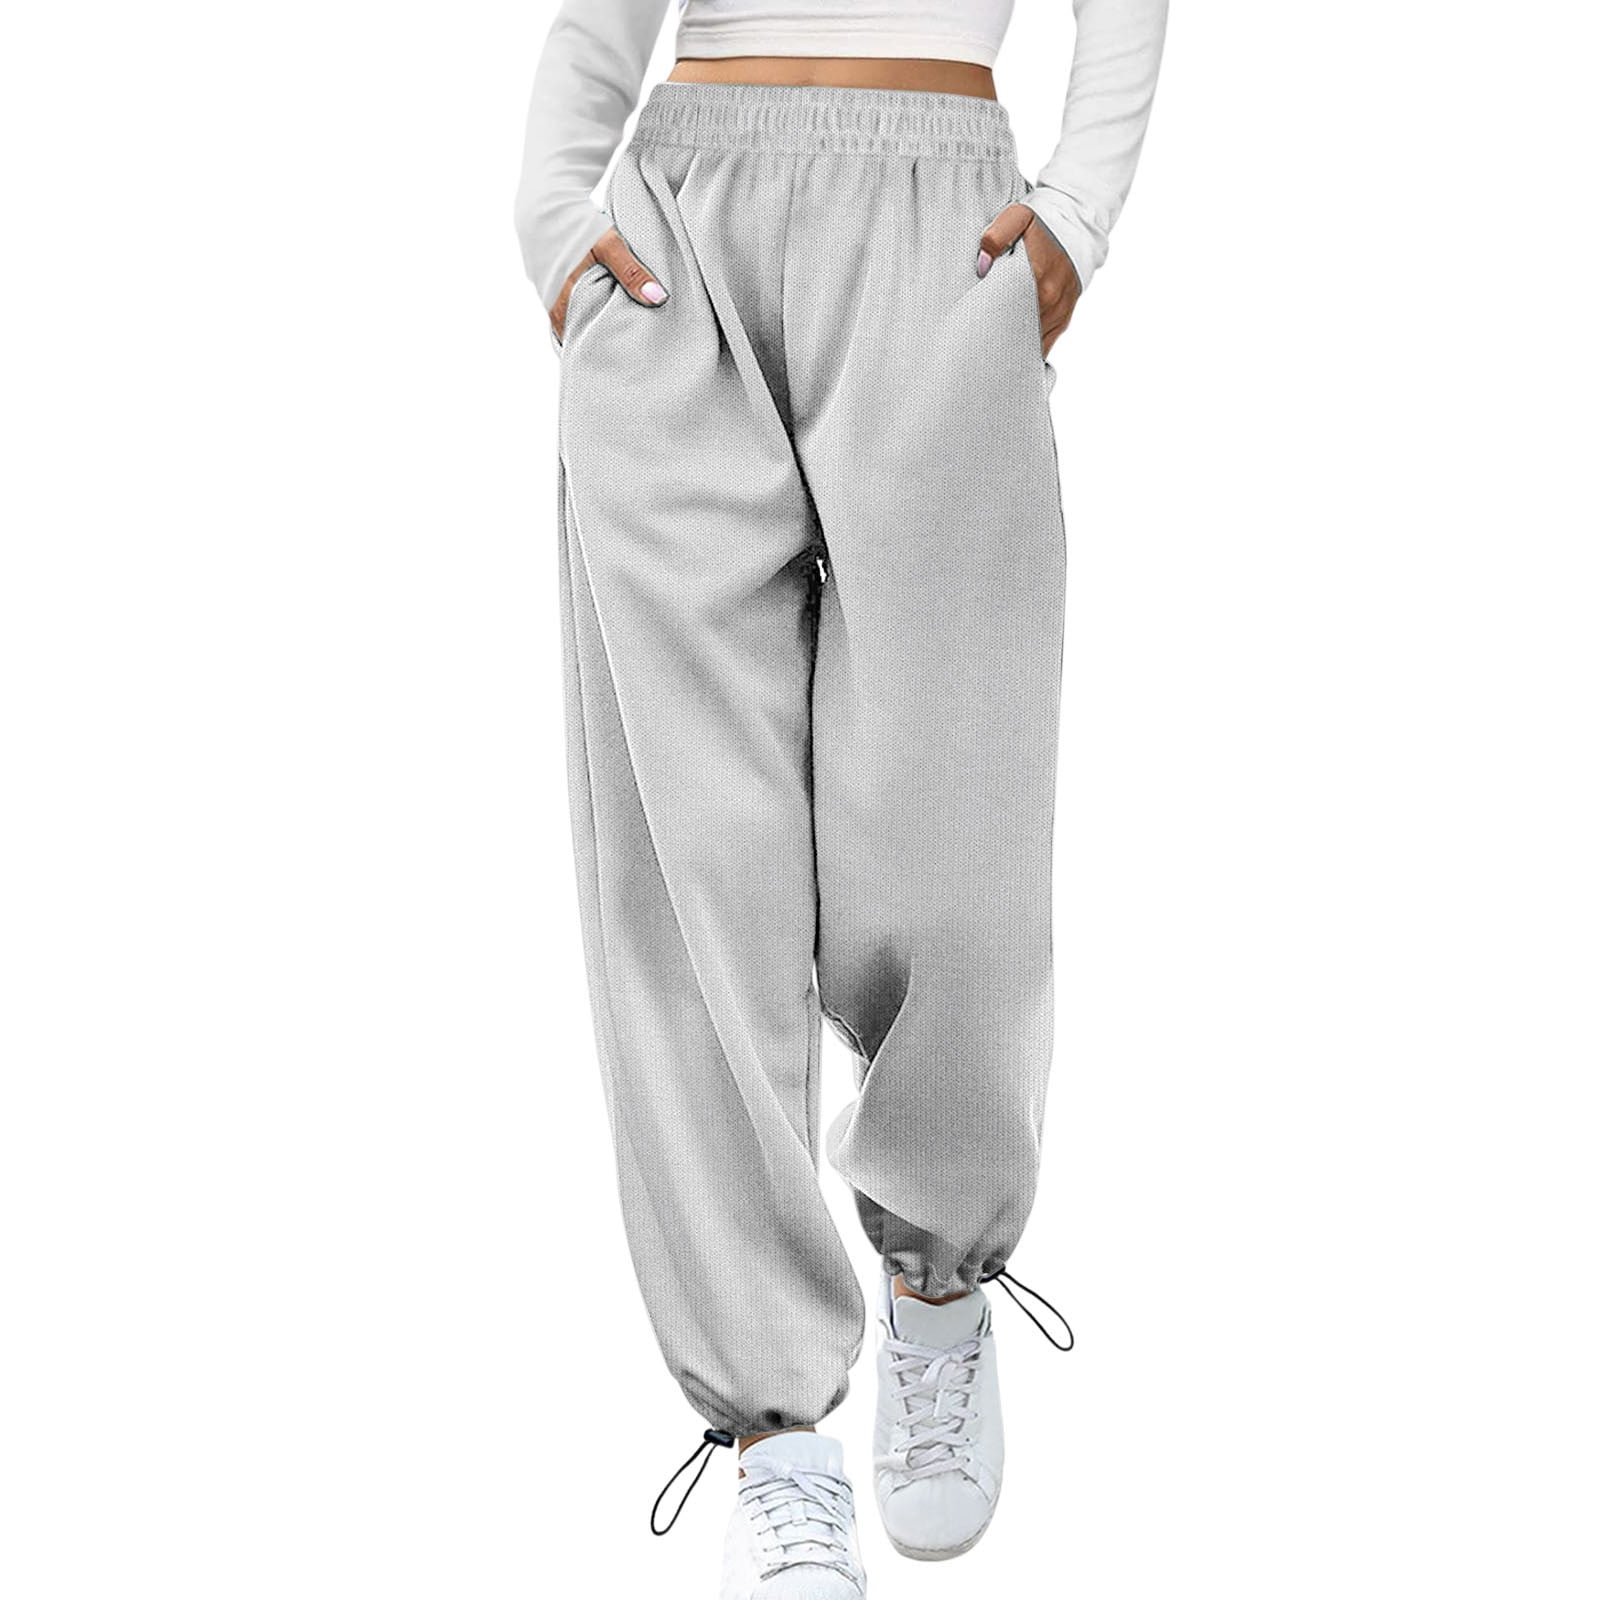 Wozhidaose Wide Leg Pants for Women Wide Leg Baggy Sweatpants High Waisted Joggers  Pants Trousers Pockets Drawstring Track Pants Joggers for Women 